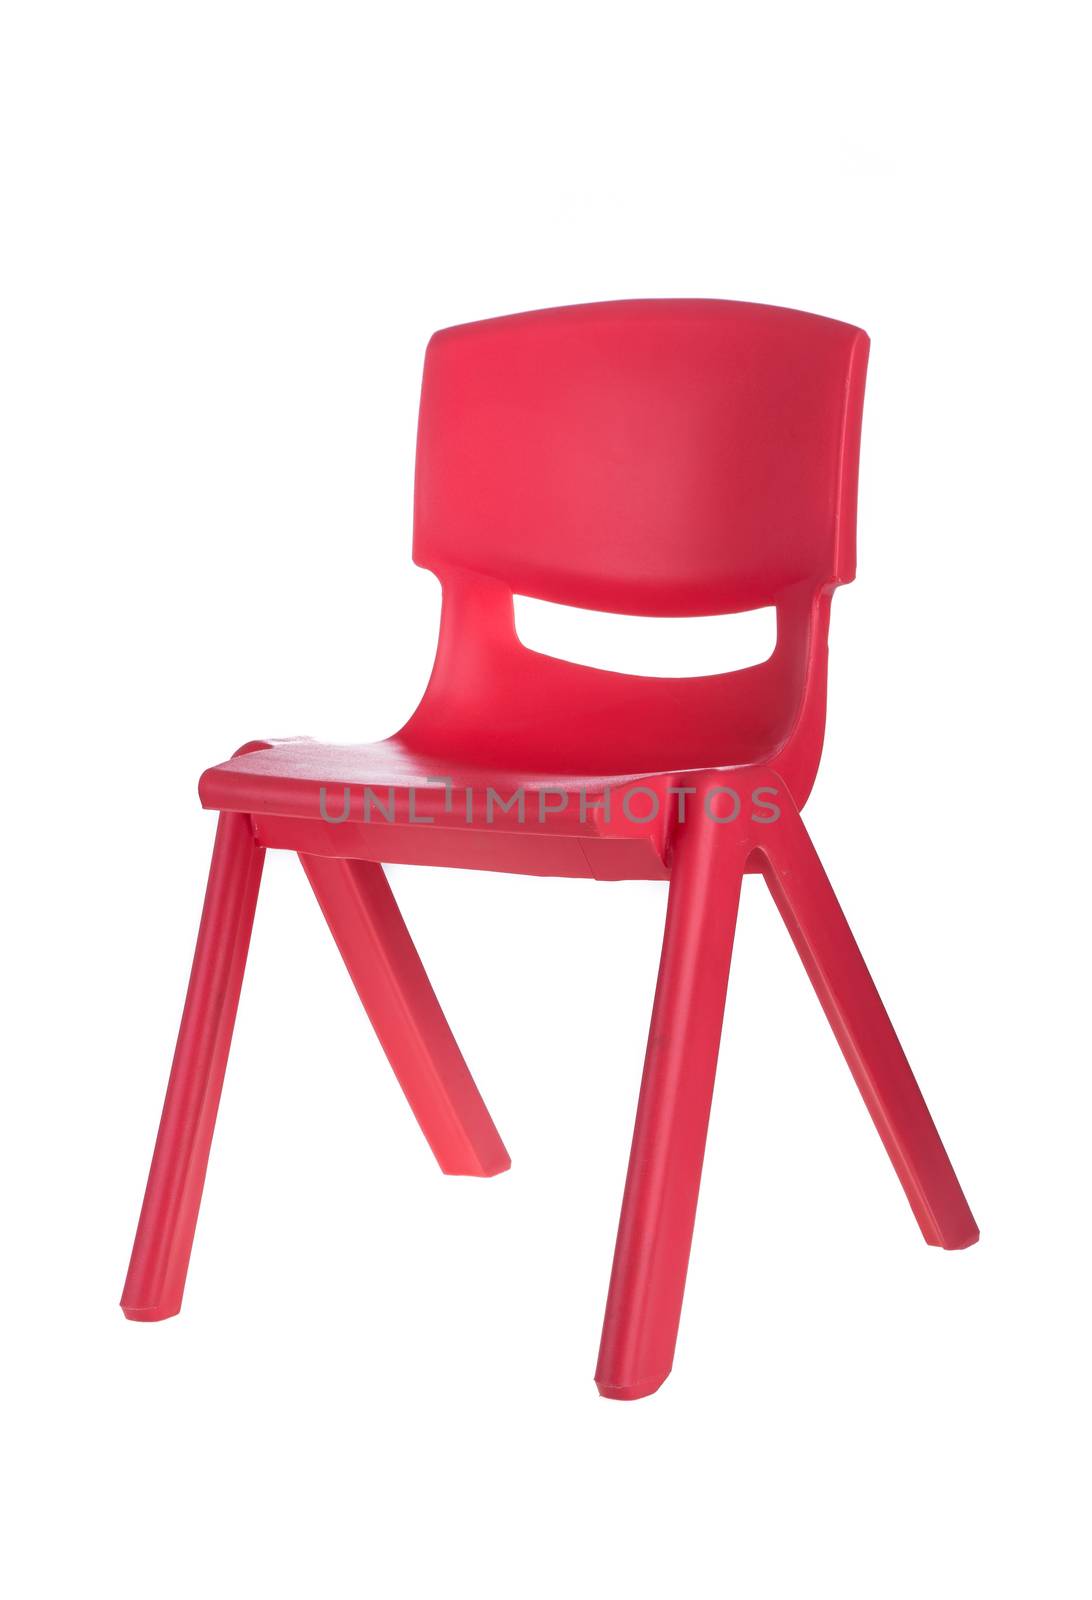 red plastic chairs isolated on white background